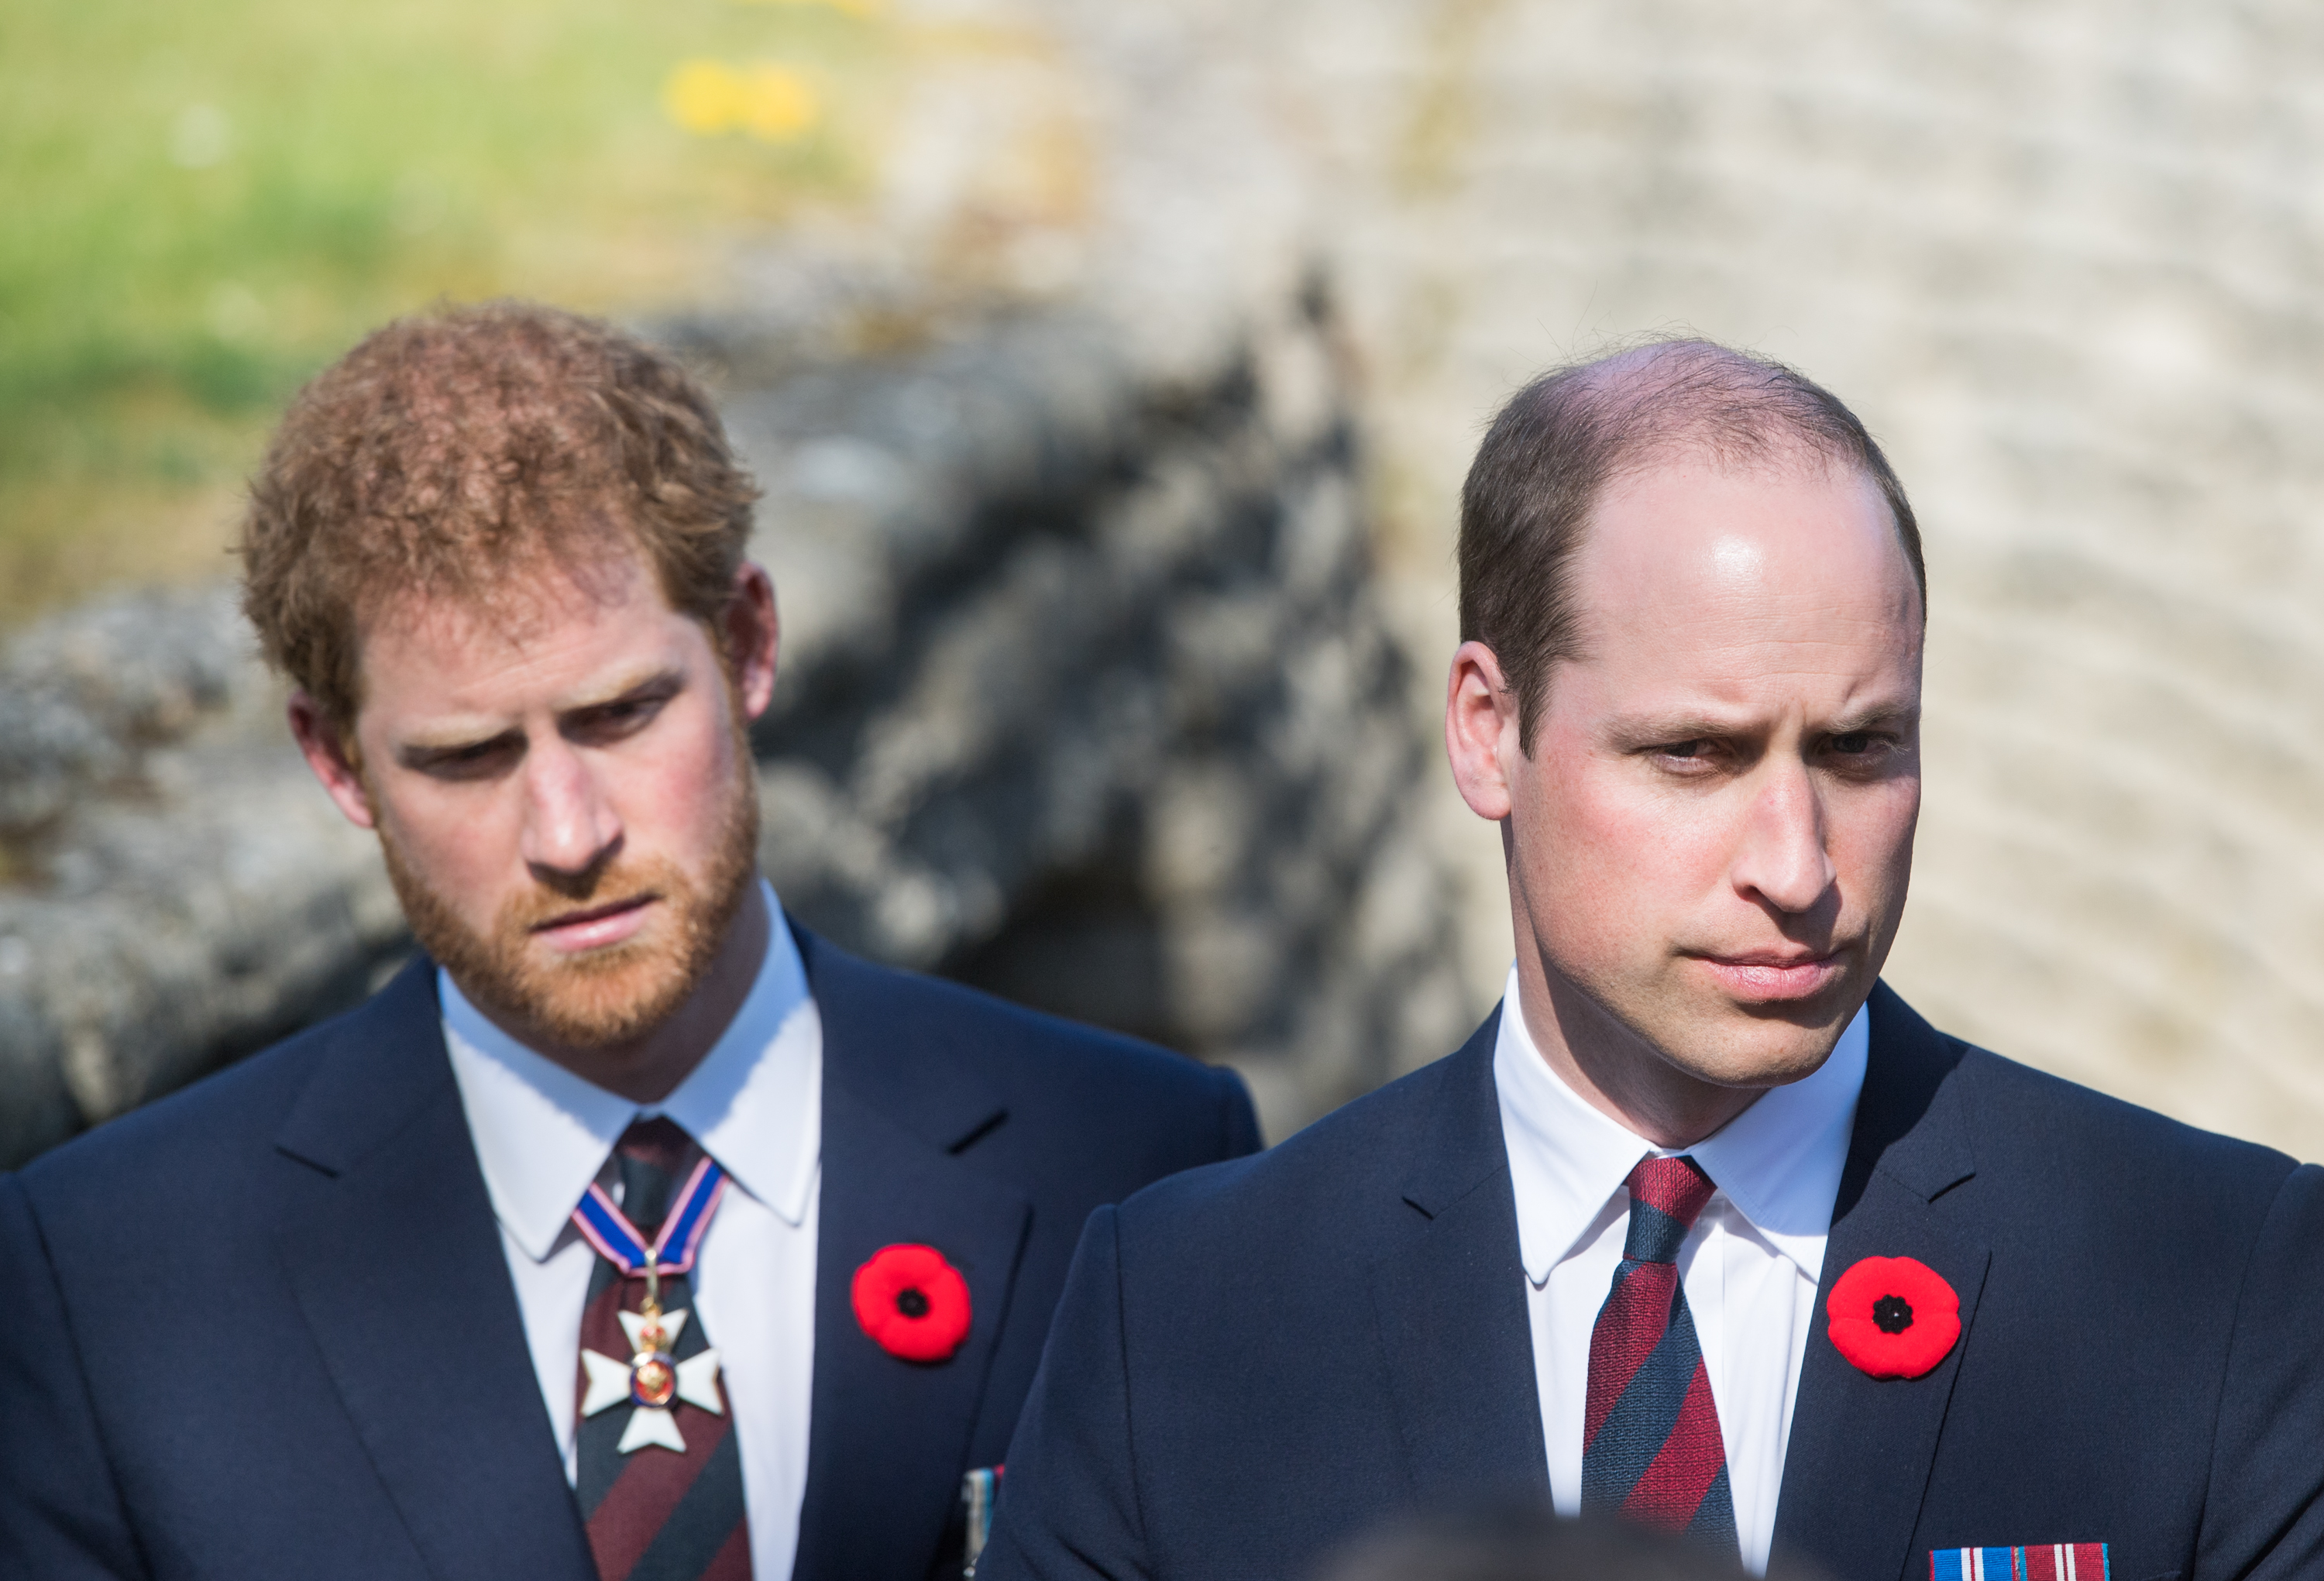 Prince Harry and Prince William walk through a trench during 100th anniversary of the battle of Vimy Ridge